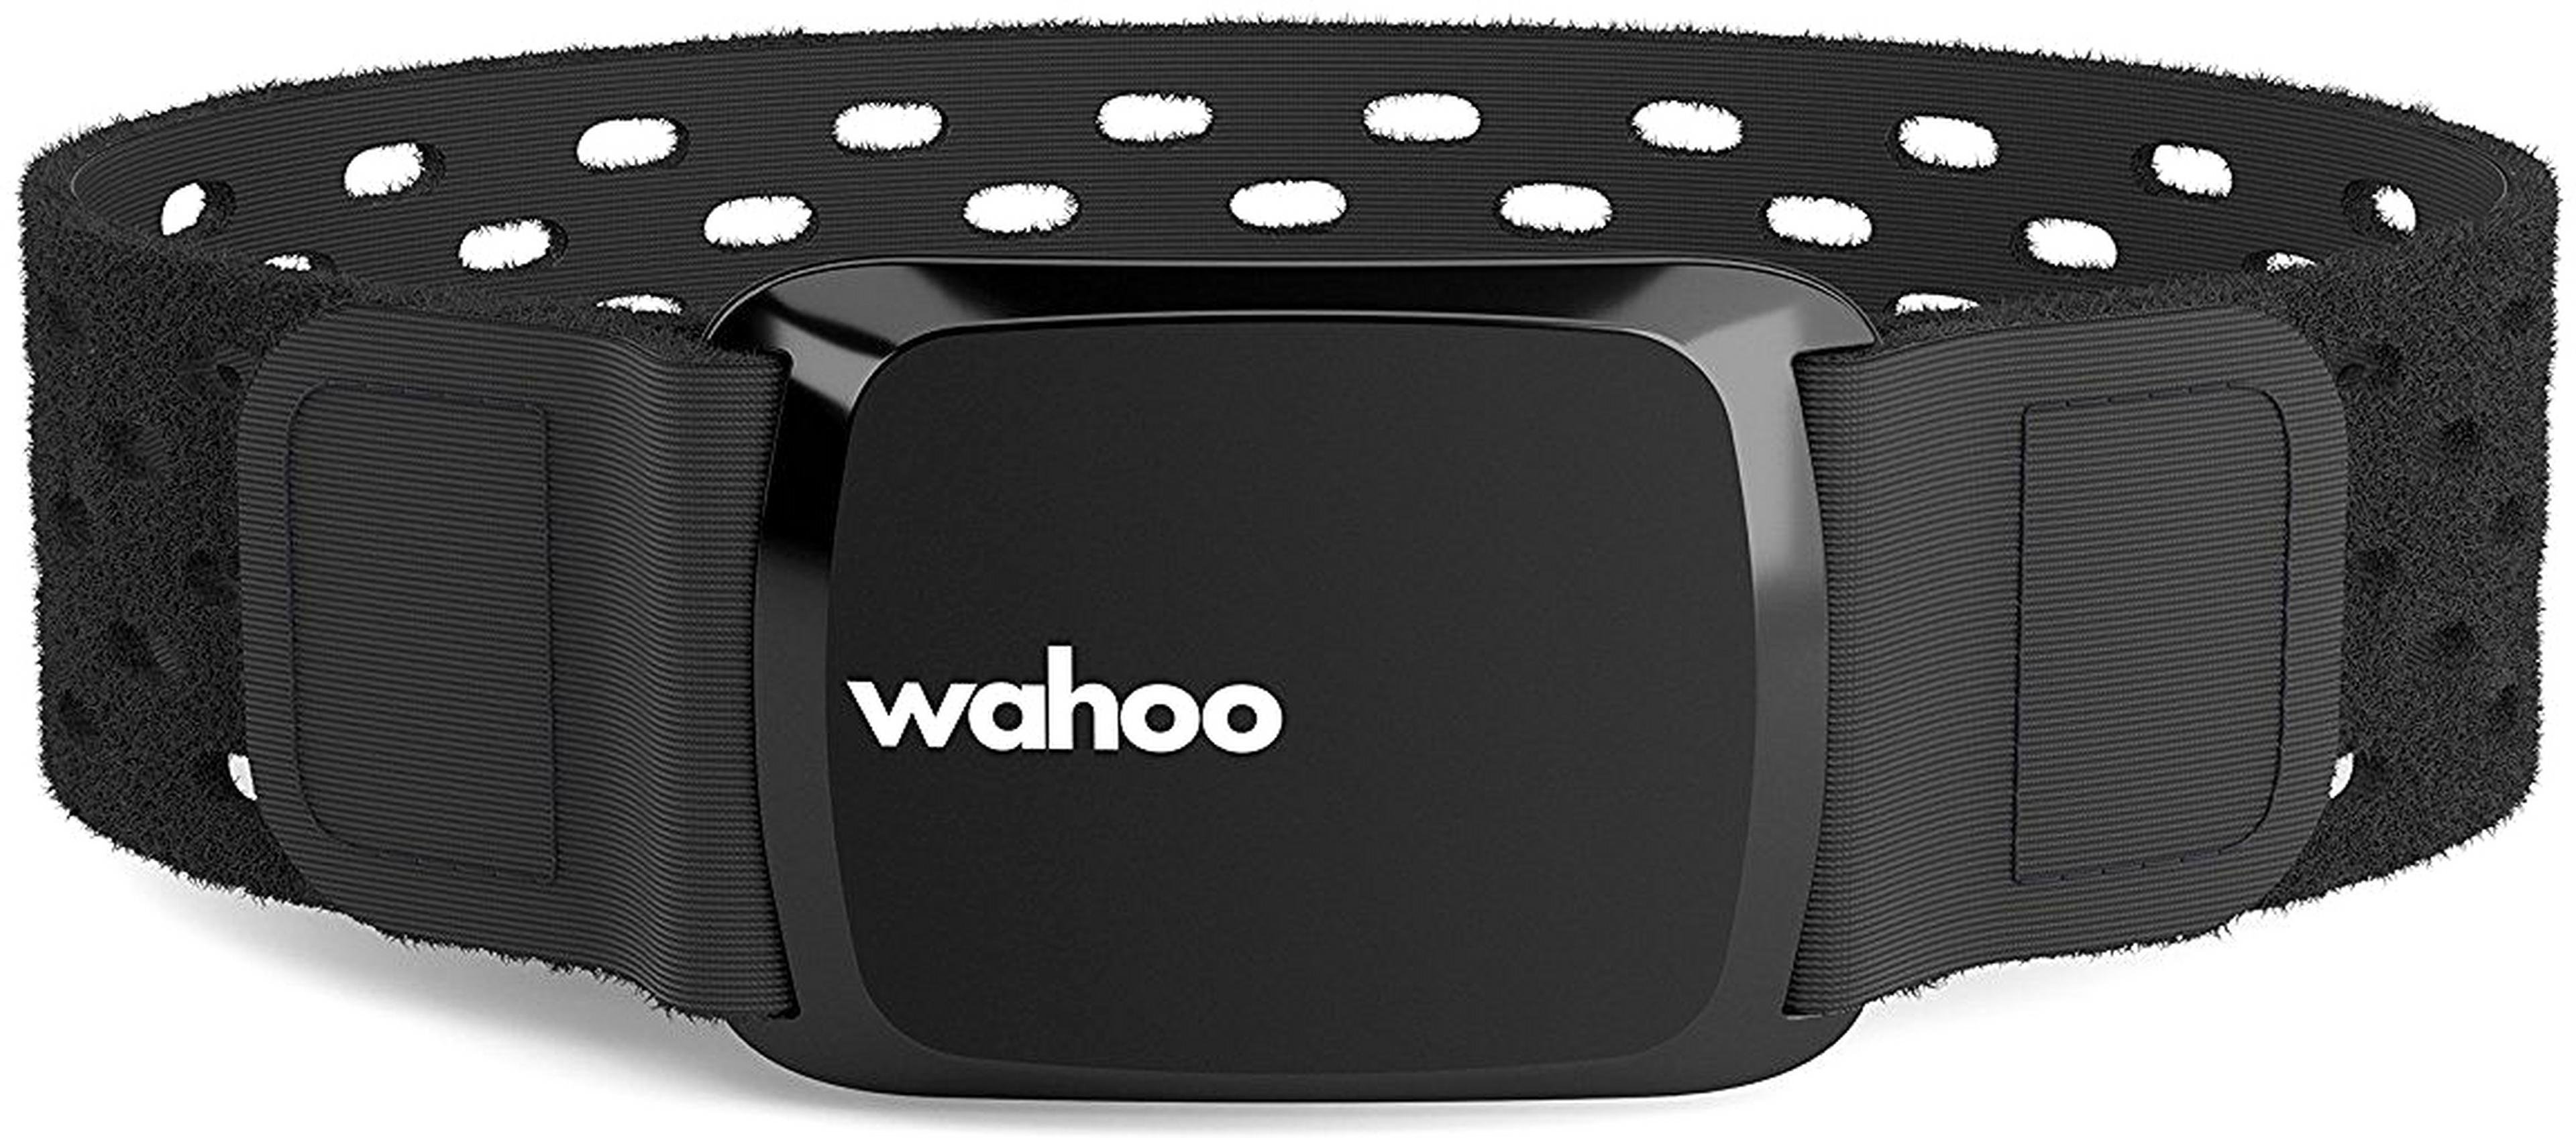 Wahoo TICKR Chest Heart Rate Monitor Review